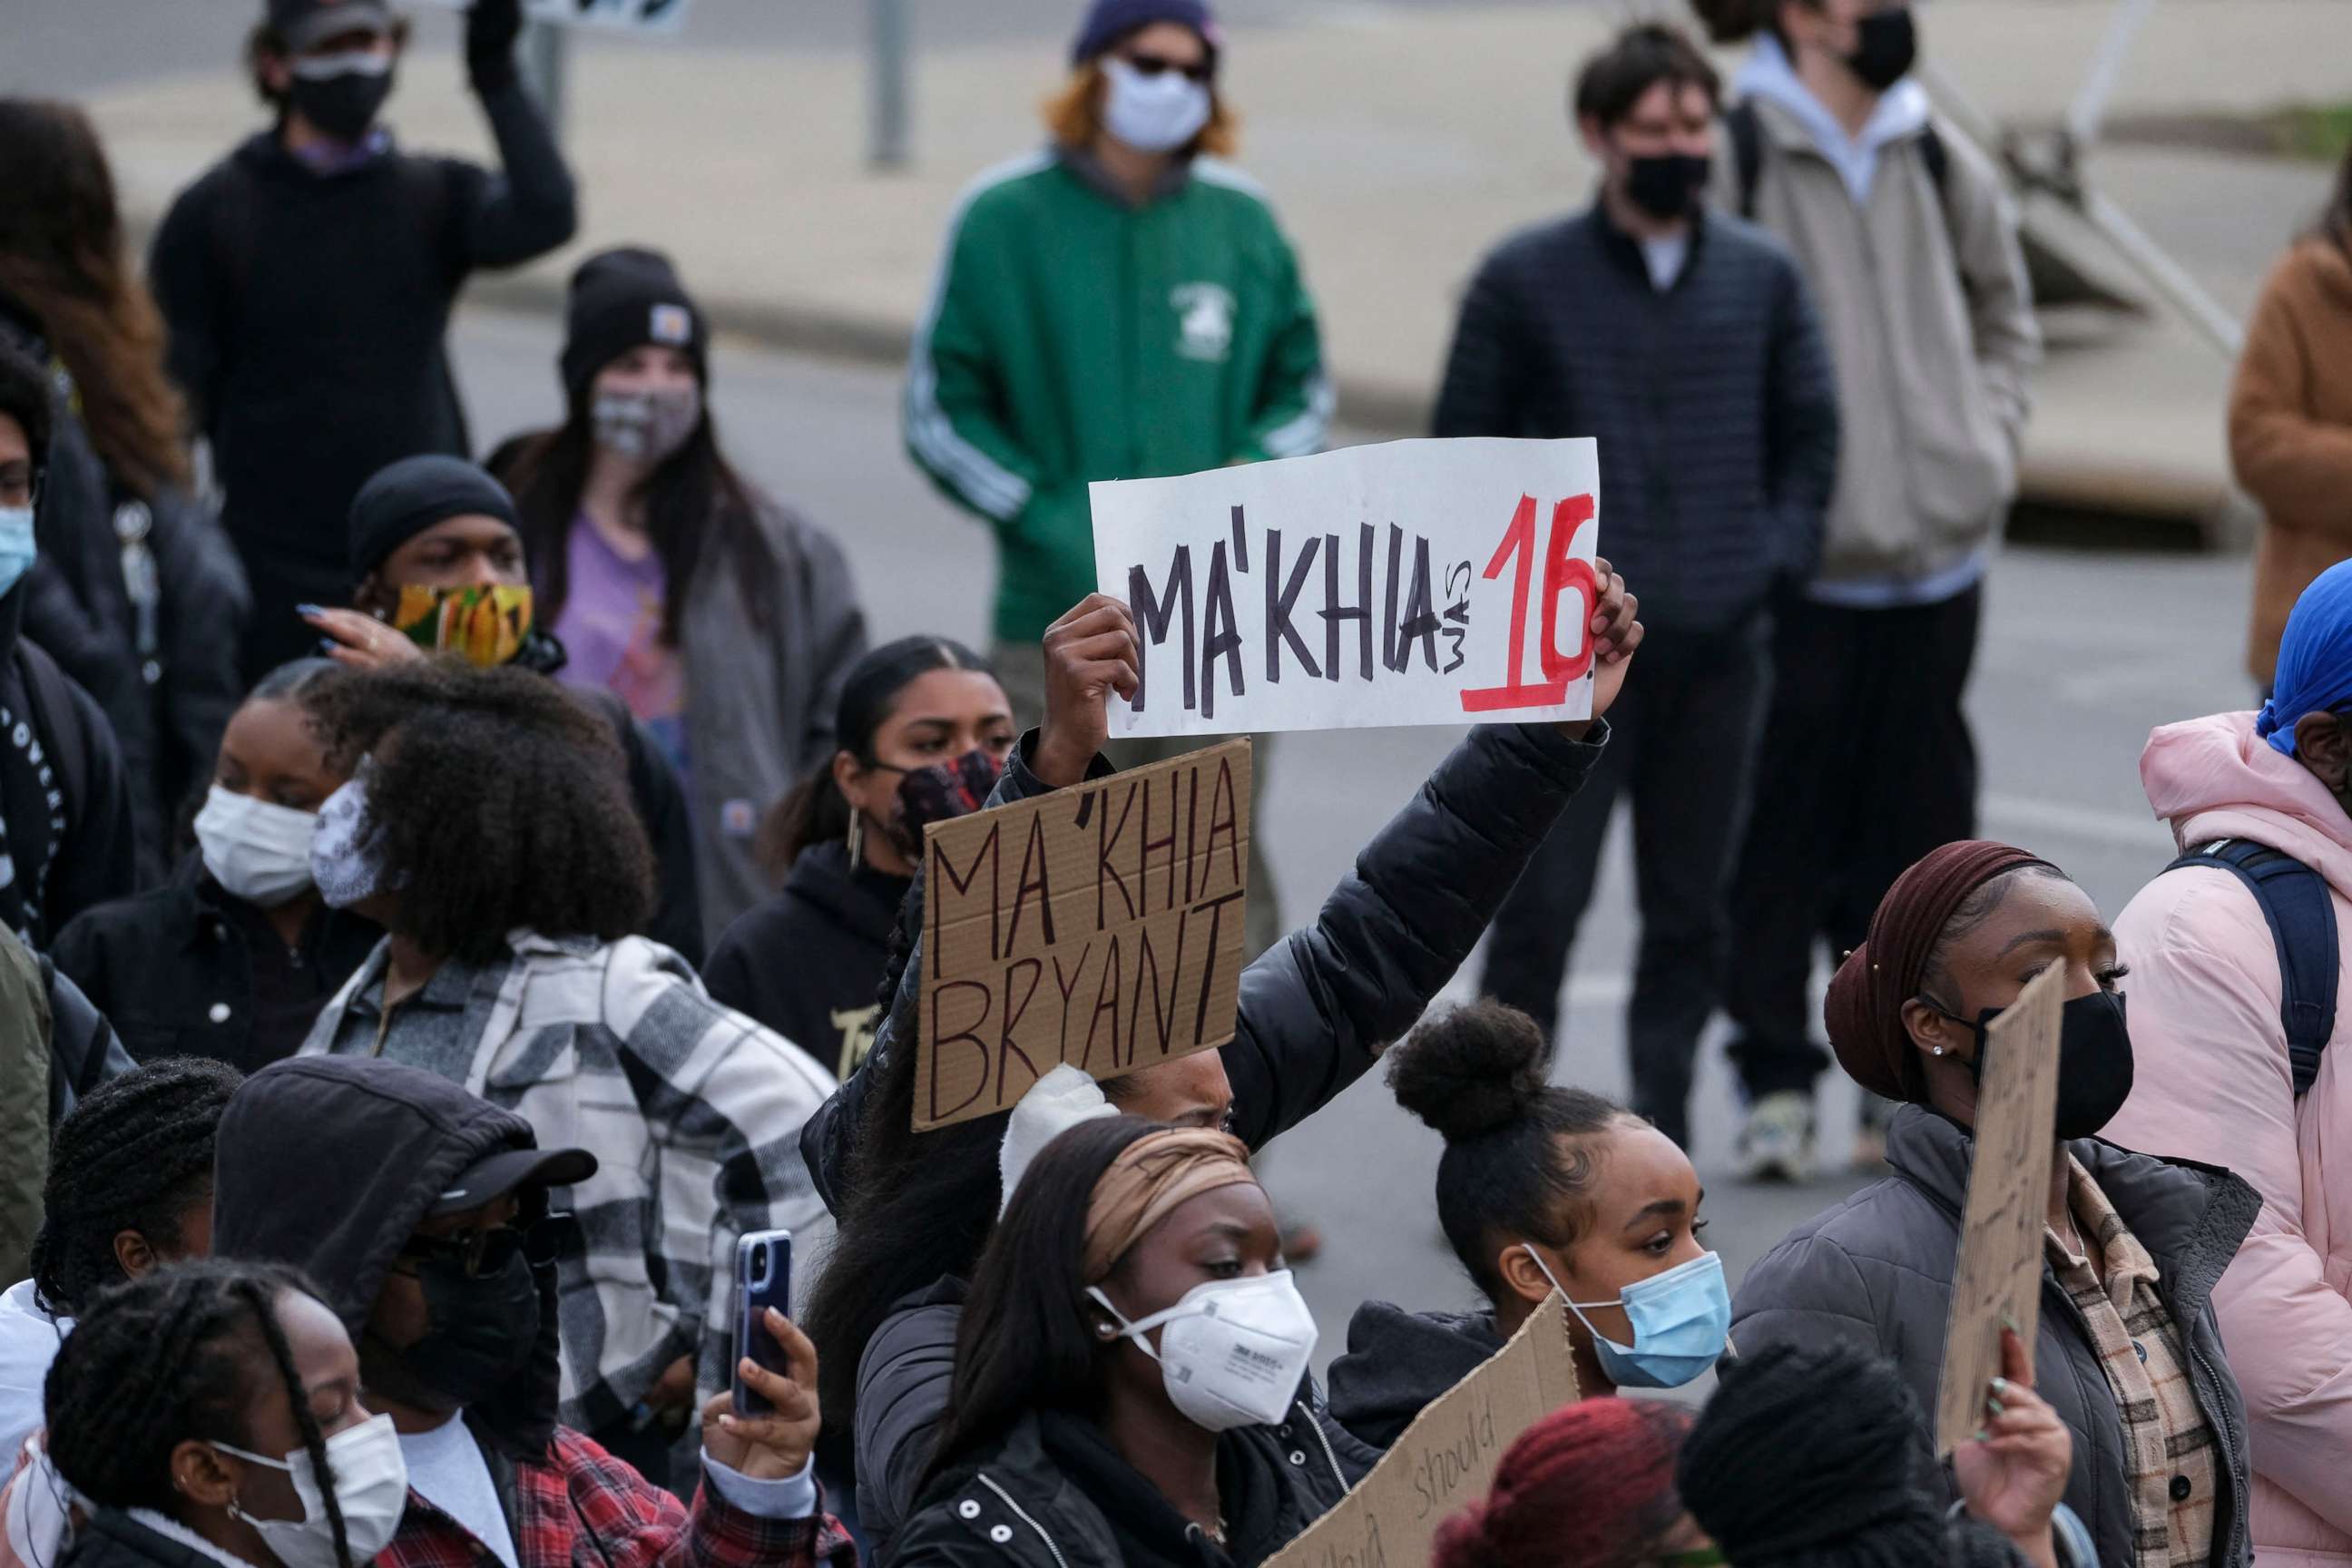 PHOTO: Students and demonstrators march on the campus of The Ohio State University in Columbus, Ohio, on April 21, 2021, to protest the killing of Ma'Khia Bryant, 16, by the Columbus Police Department.